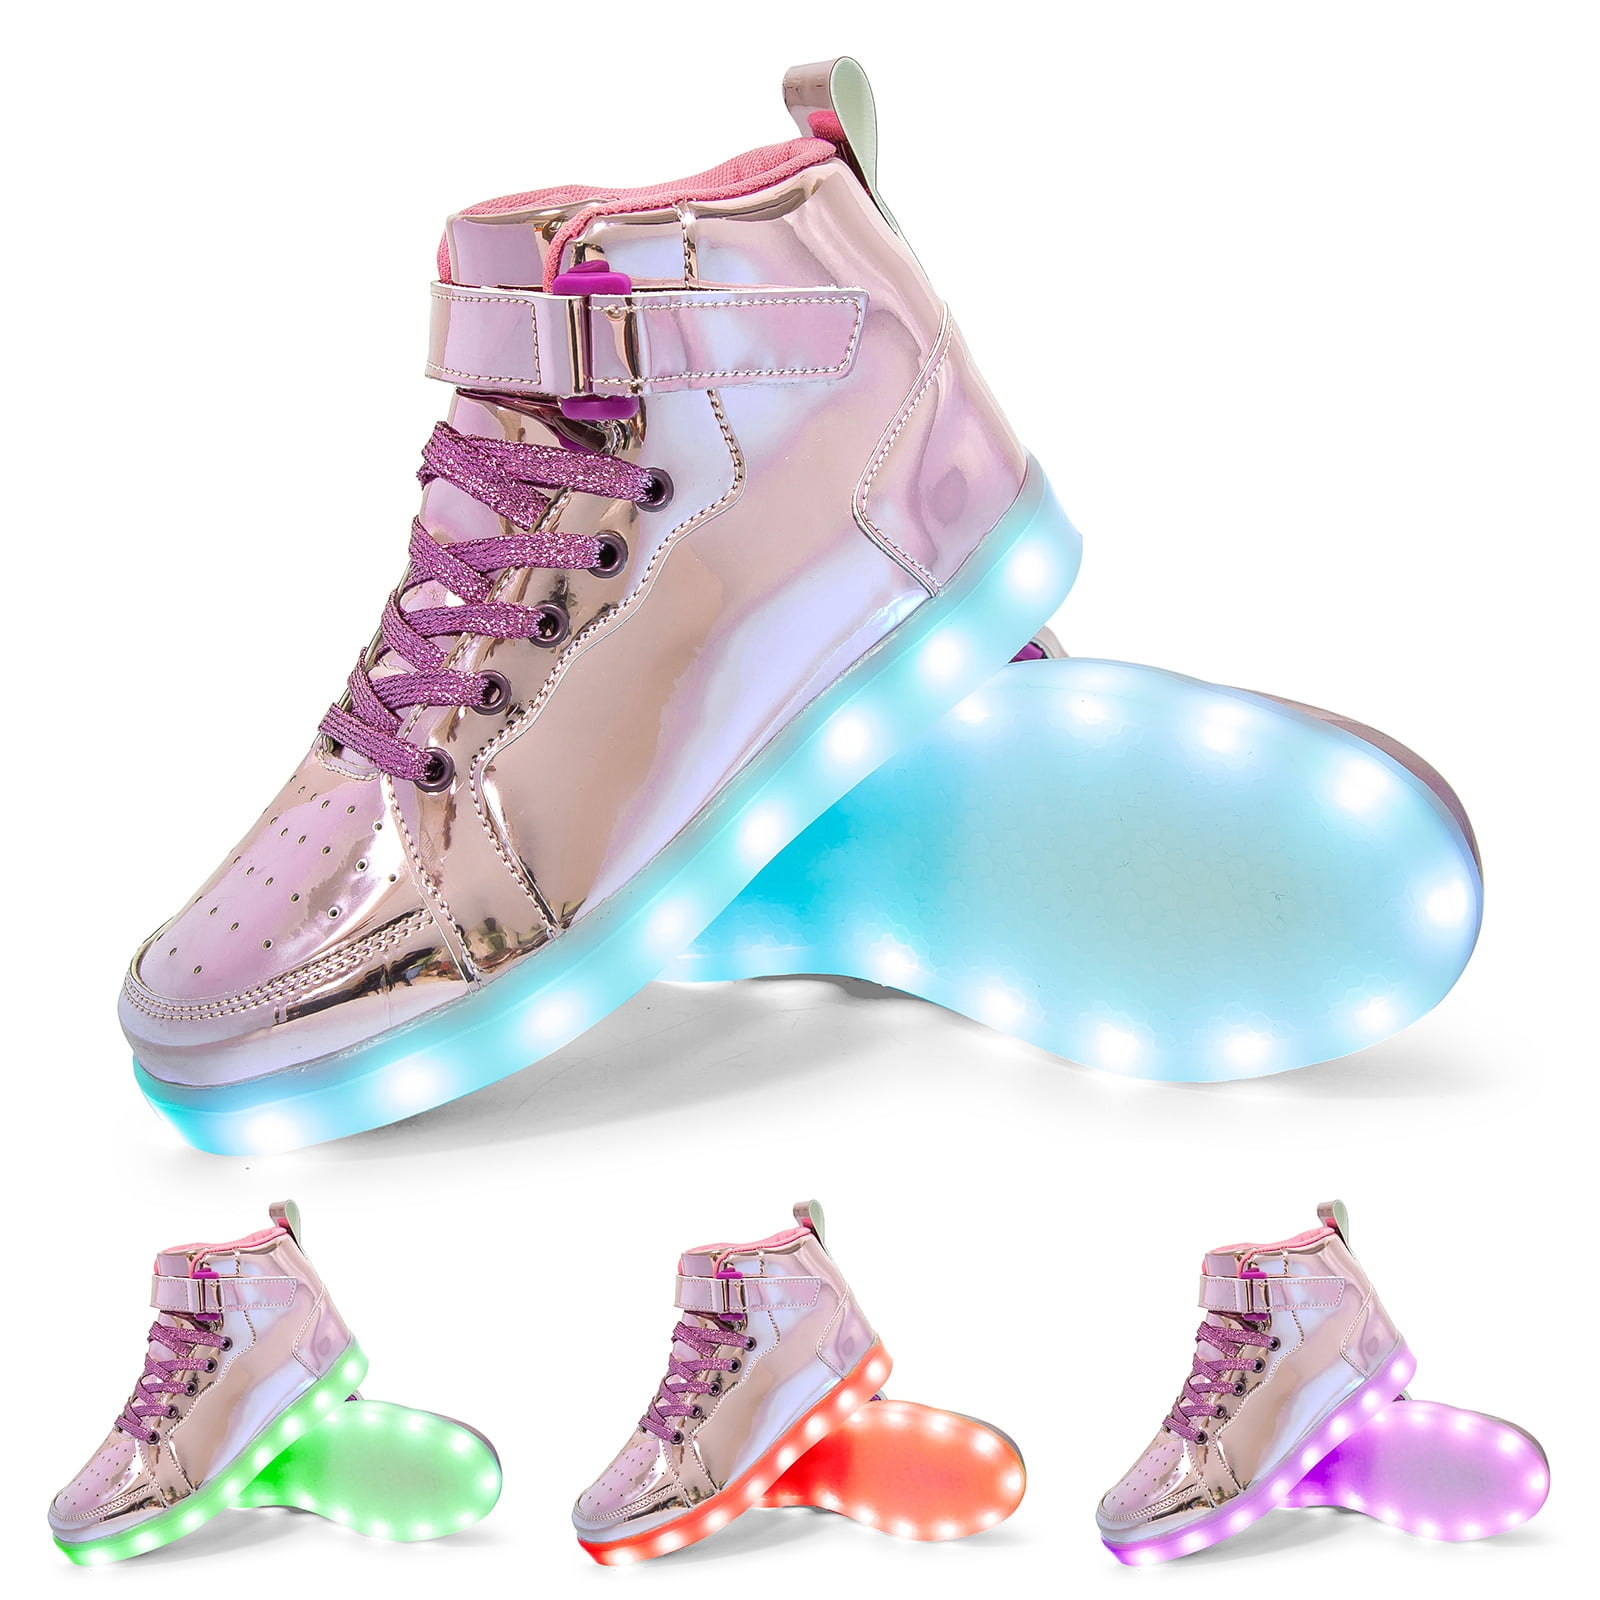 VNANV Unisex LED Light up Shoes High Top Sneakers Flashing Shoes for ...